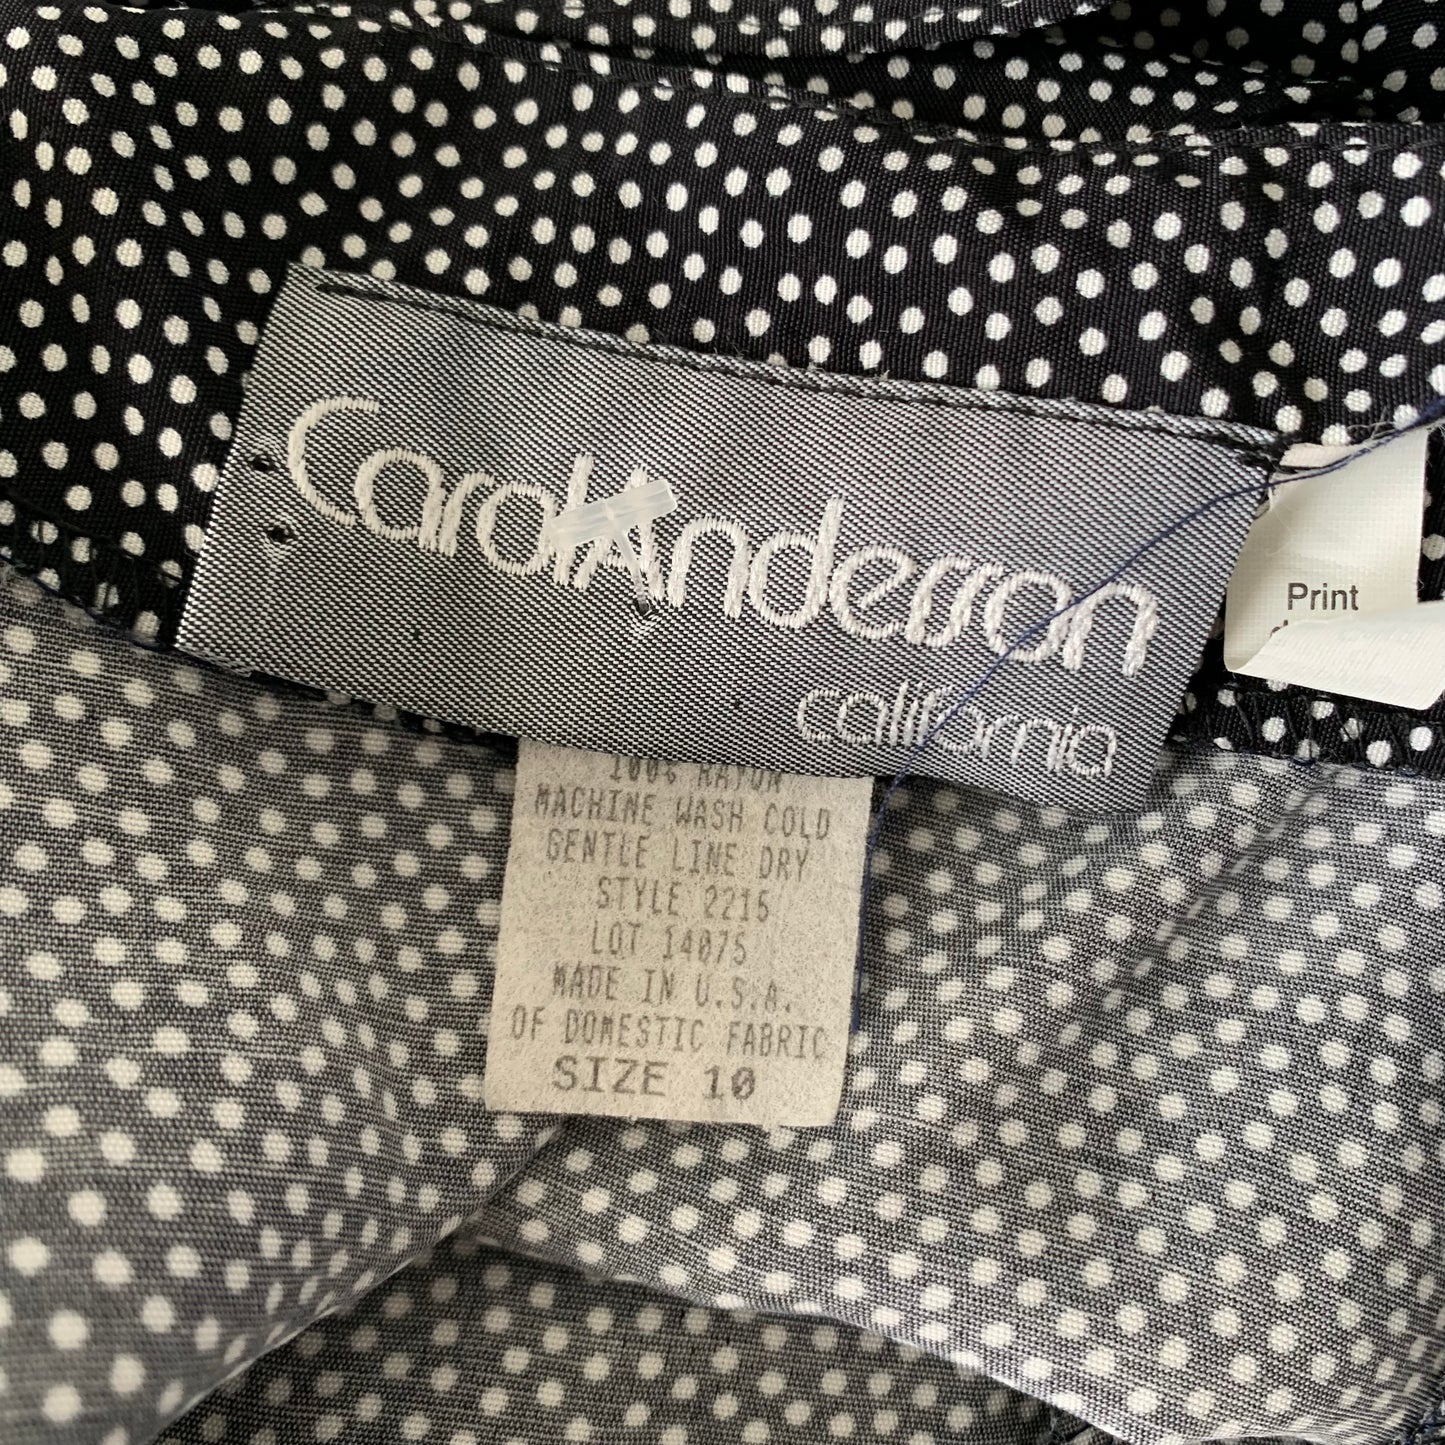 Vintage 90s Carol Anderson Black and White Polka Dot Cross back Maxi Dress with Shell Buttons 10